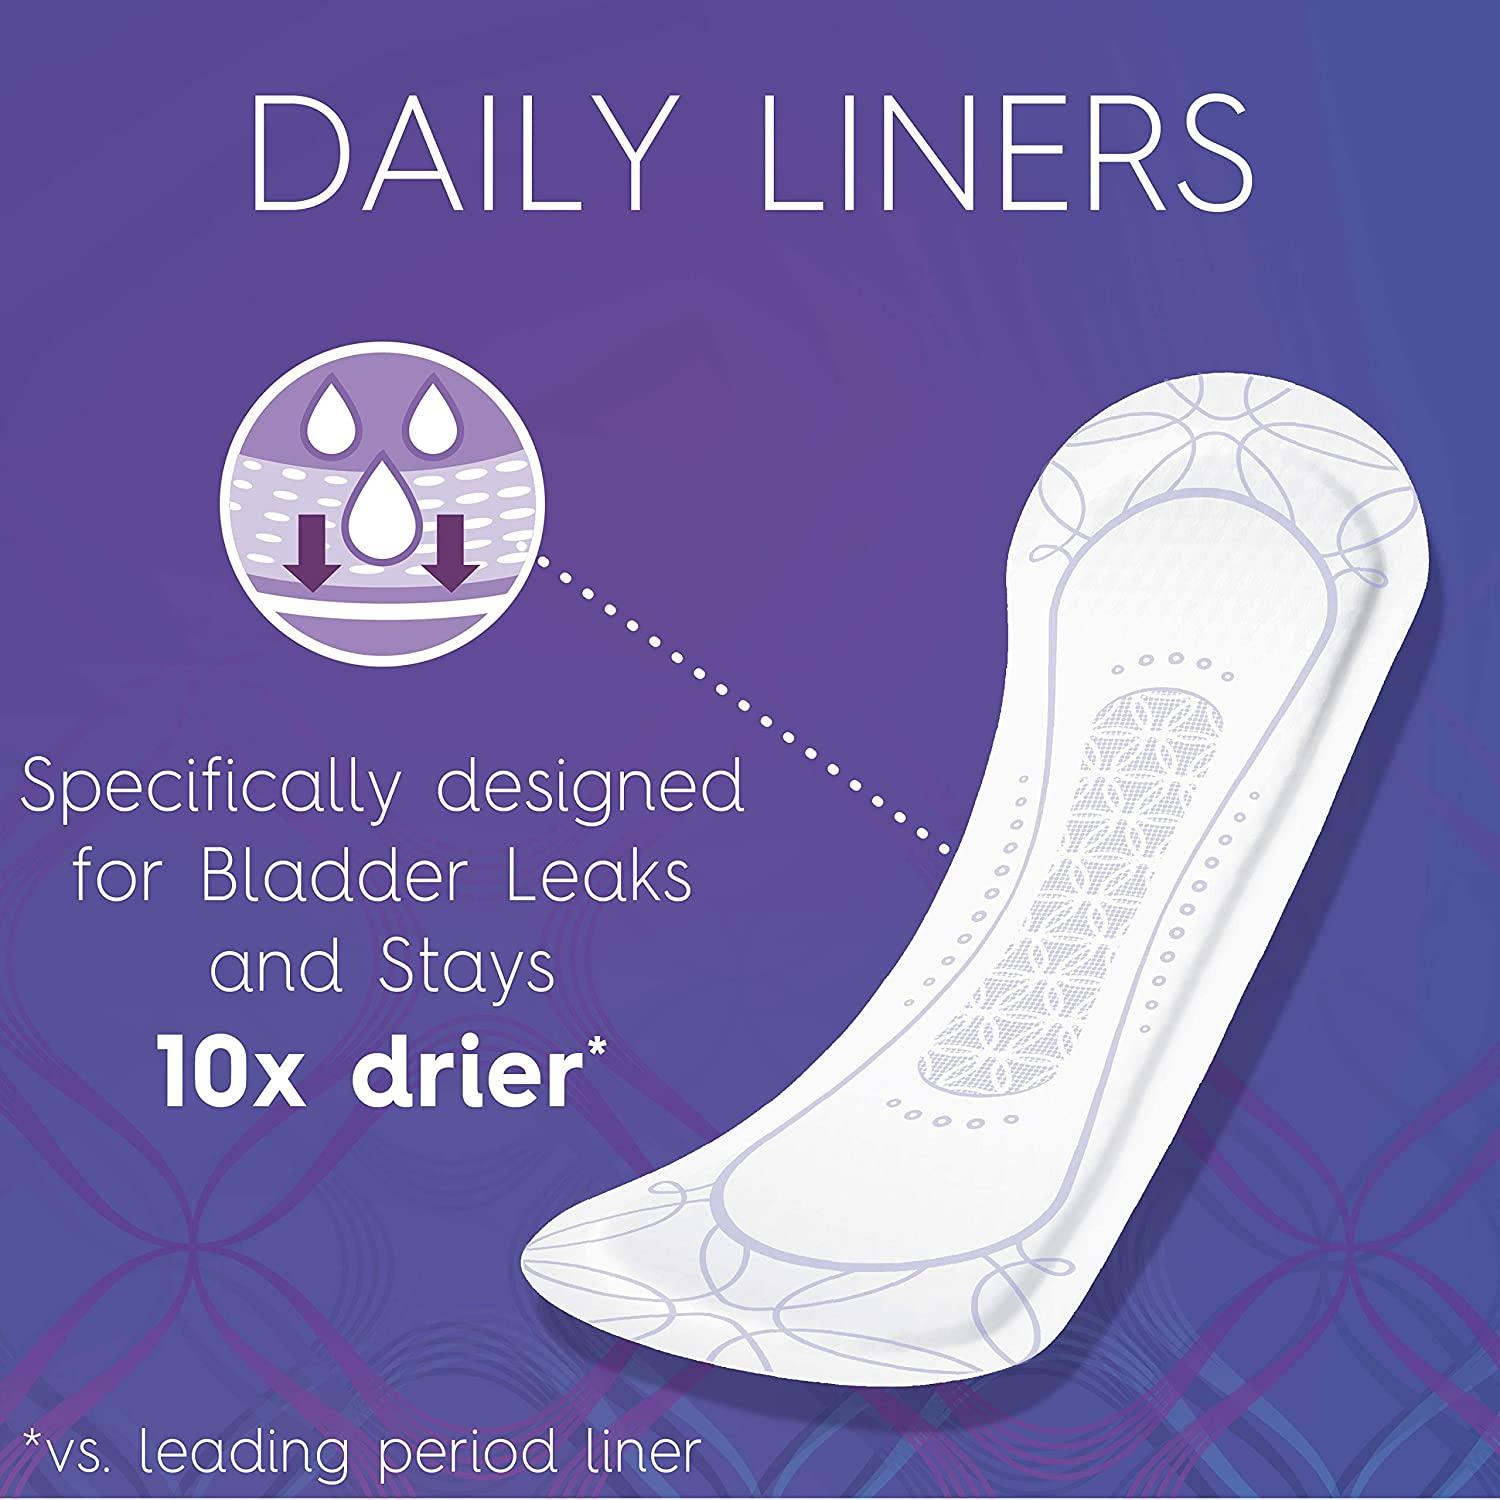 Poise Incontinence Liners